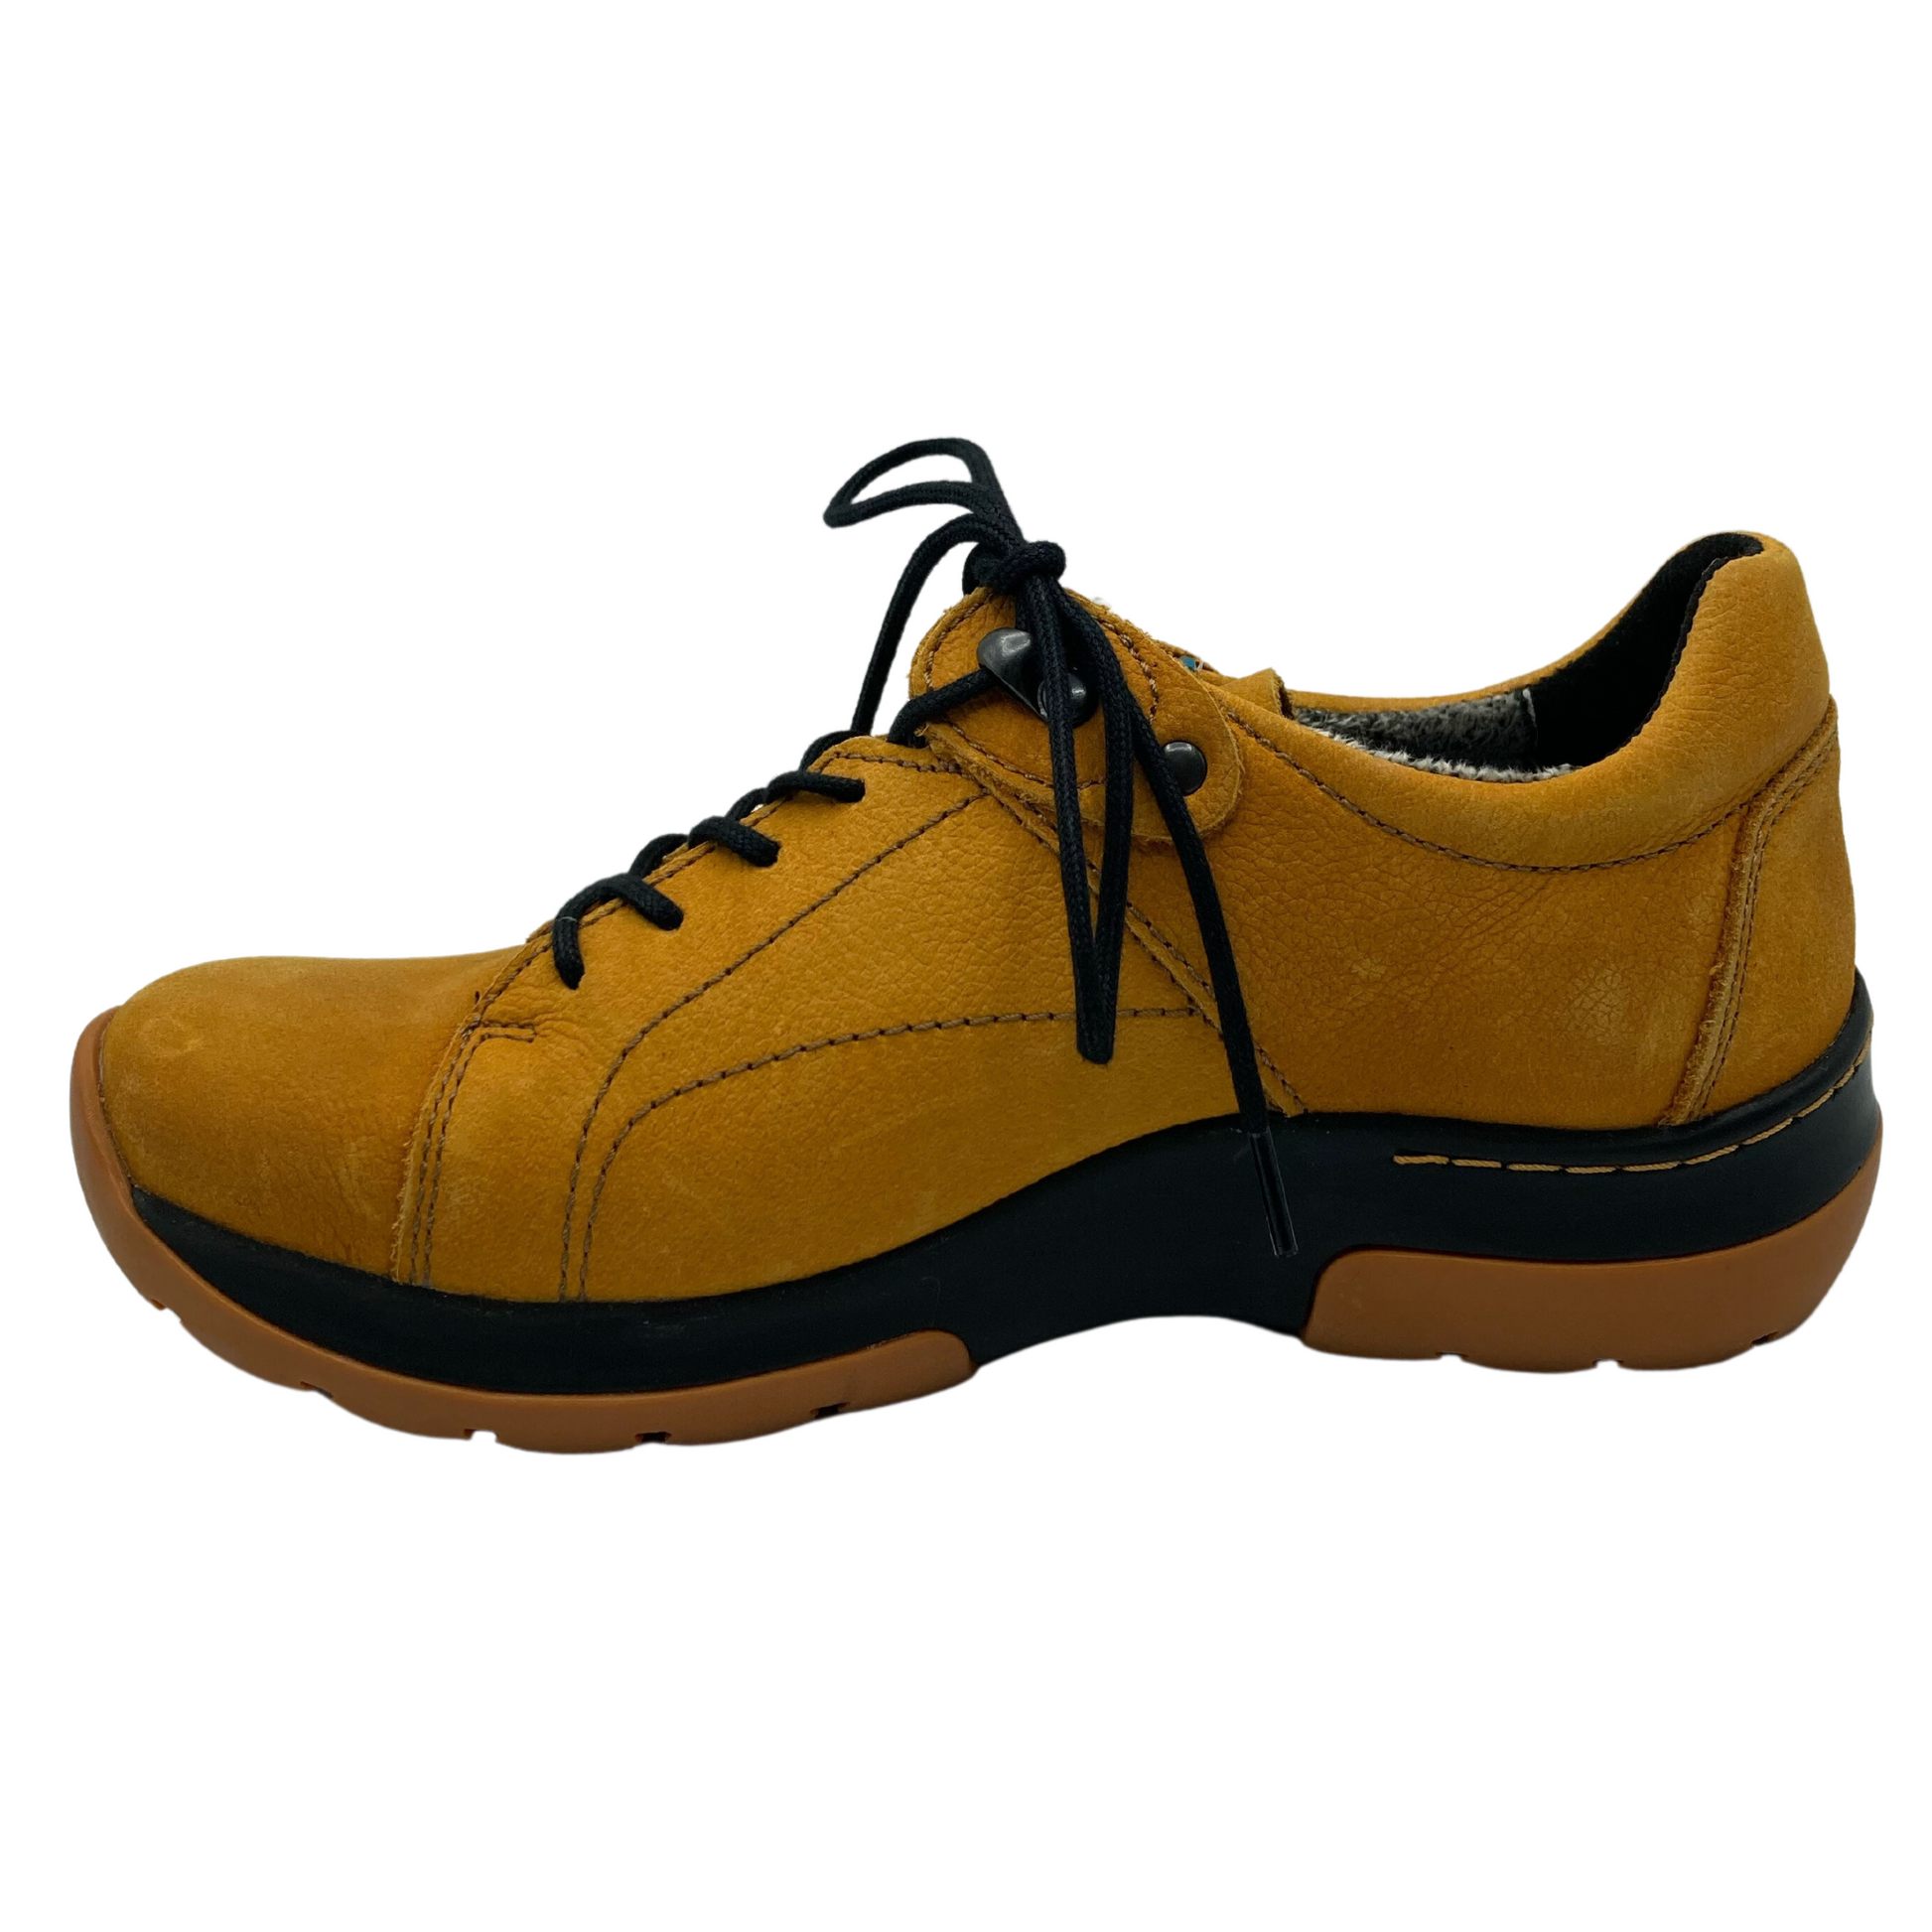 Left facing view of yellow nubuck sneaker with thick rubber sole and black laces